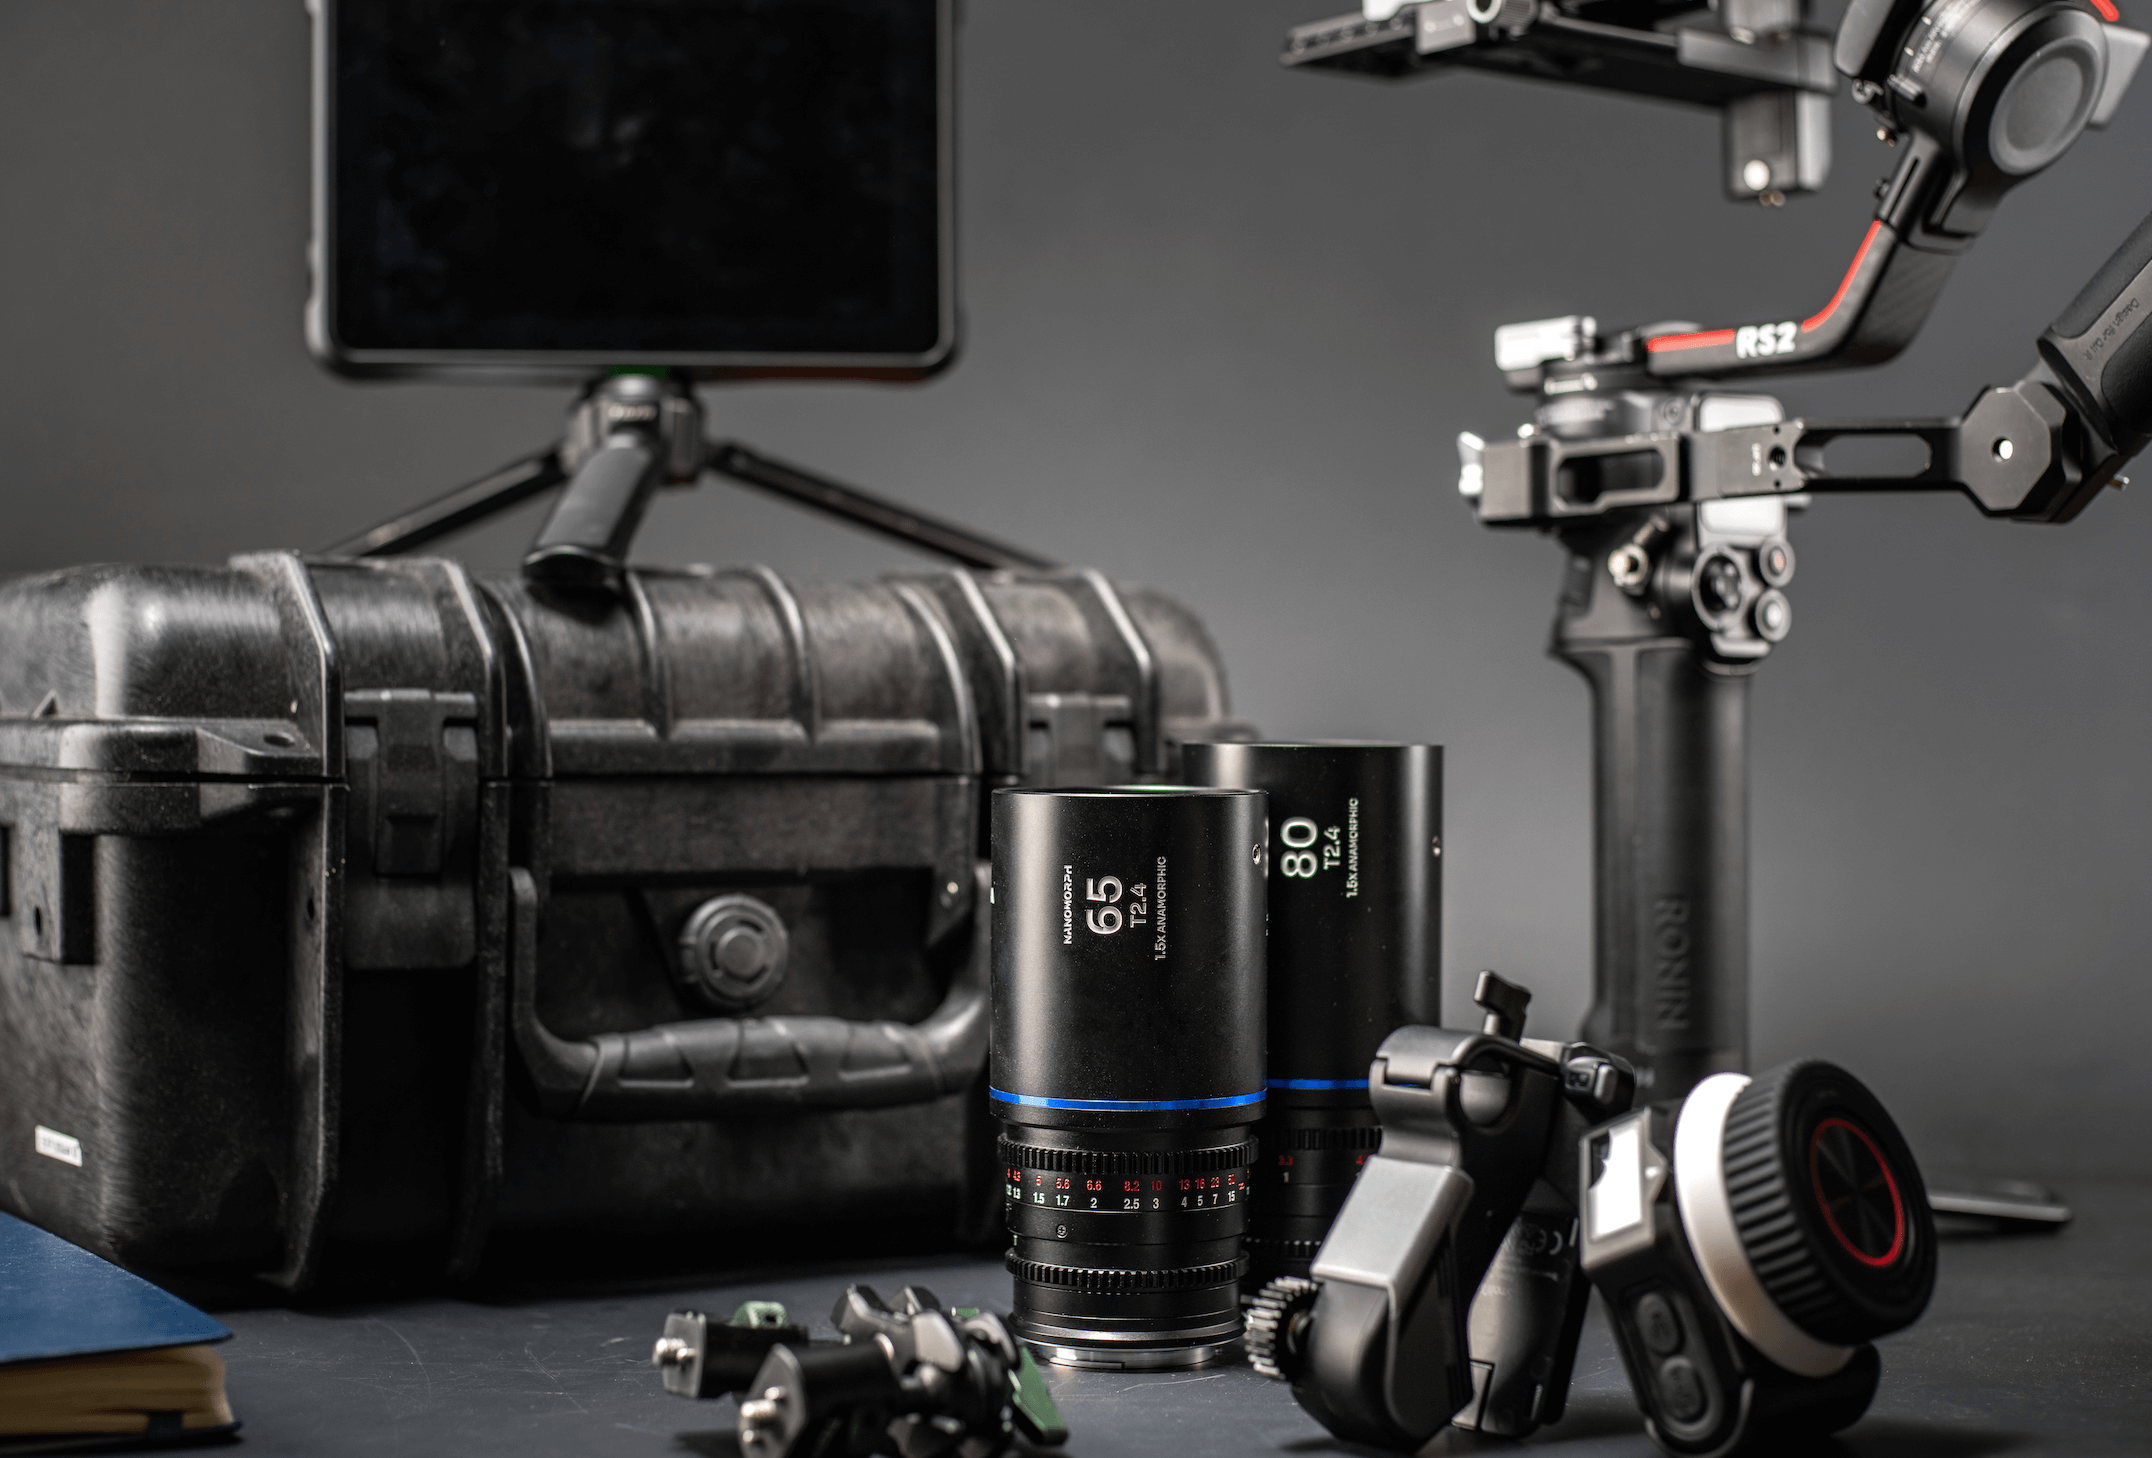 unnamed file 7 - Laowa unveils new 65mm and 80mm for the Nanomorph Series, together with a 1.33X Front Anamorphic Adapter